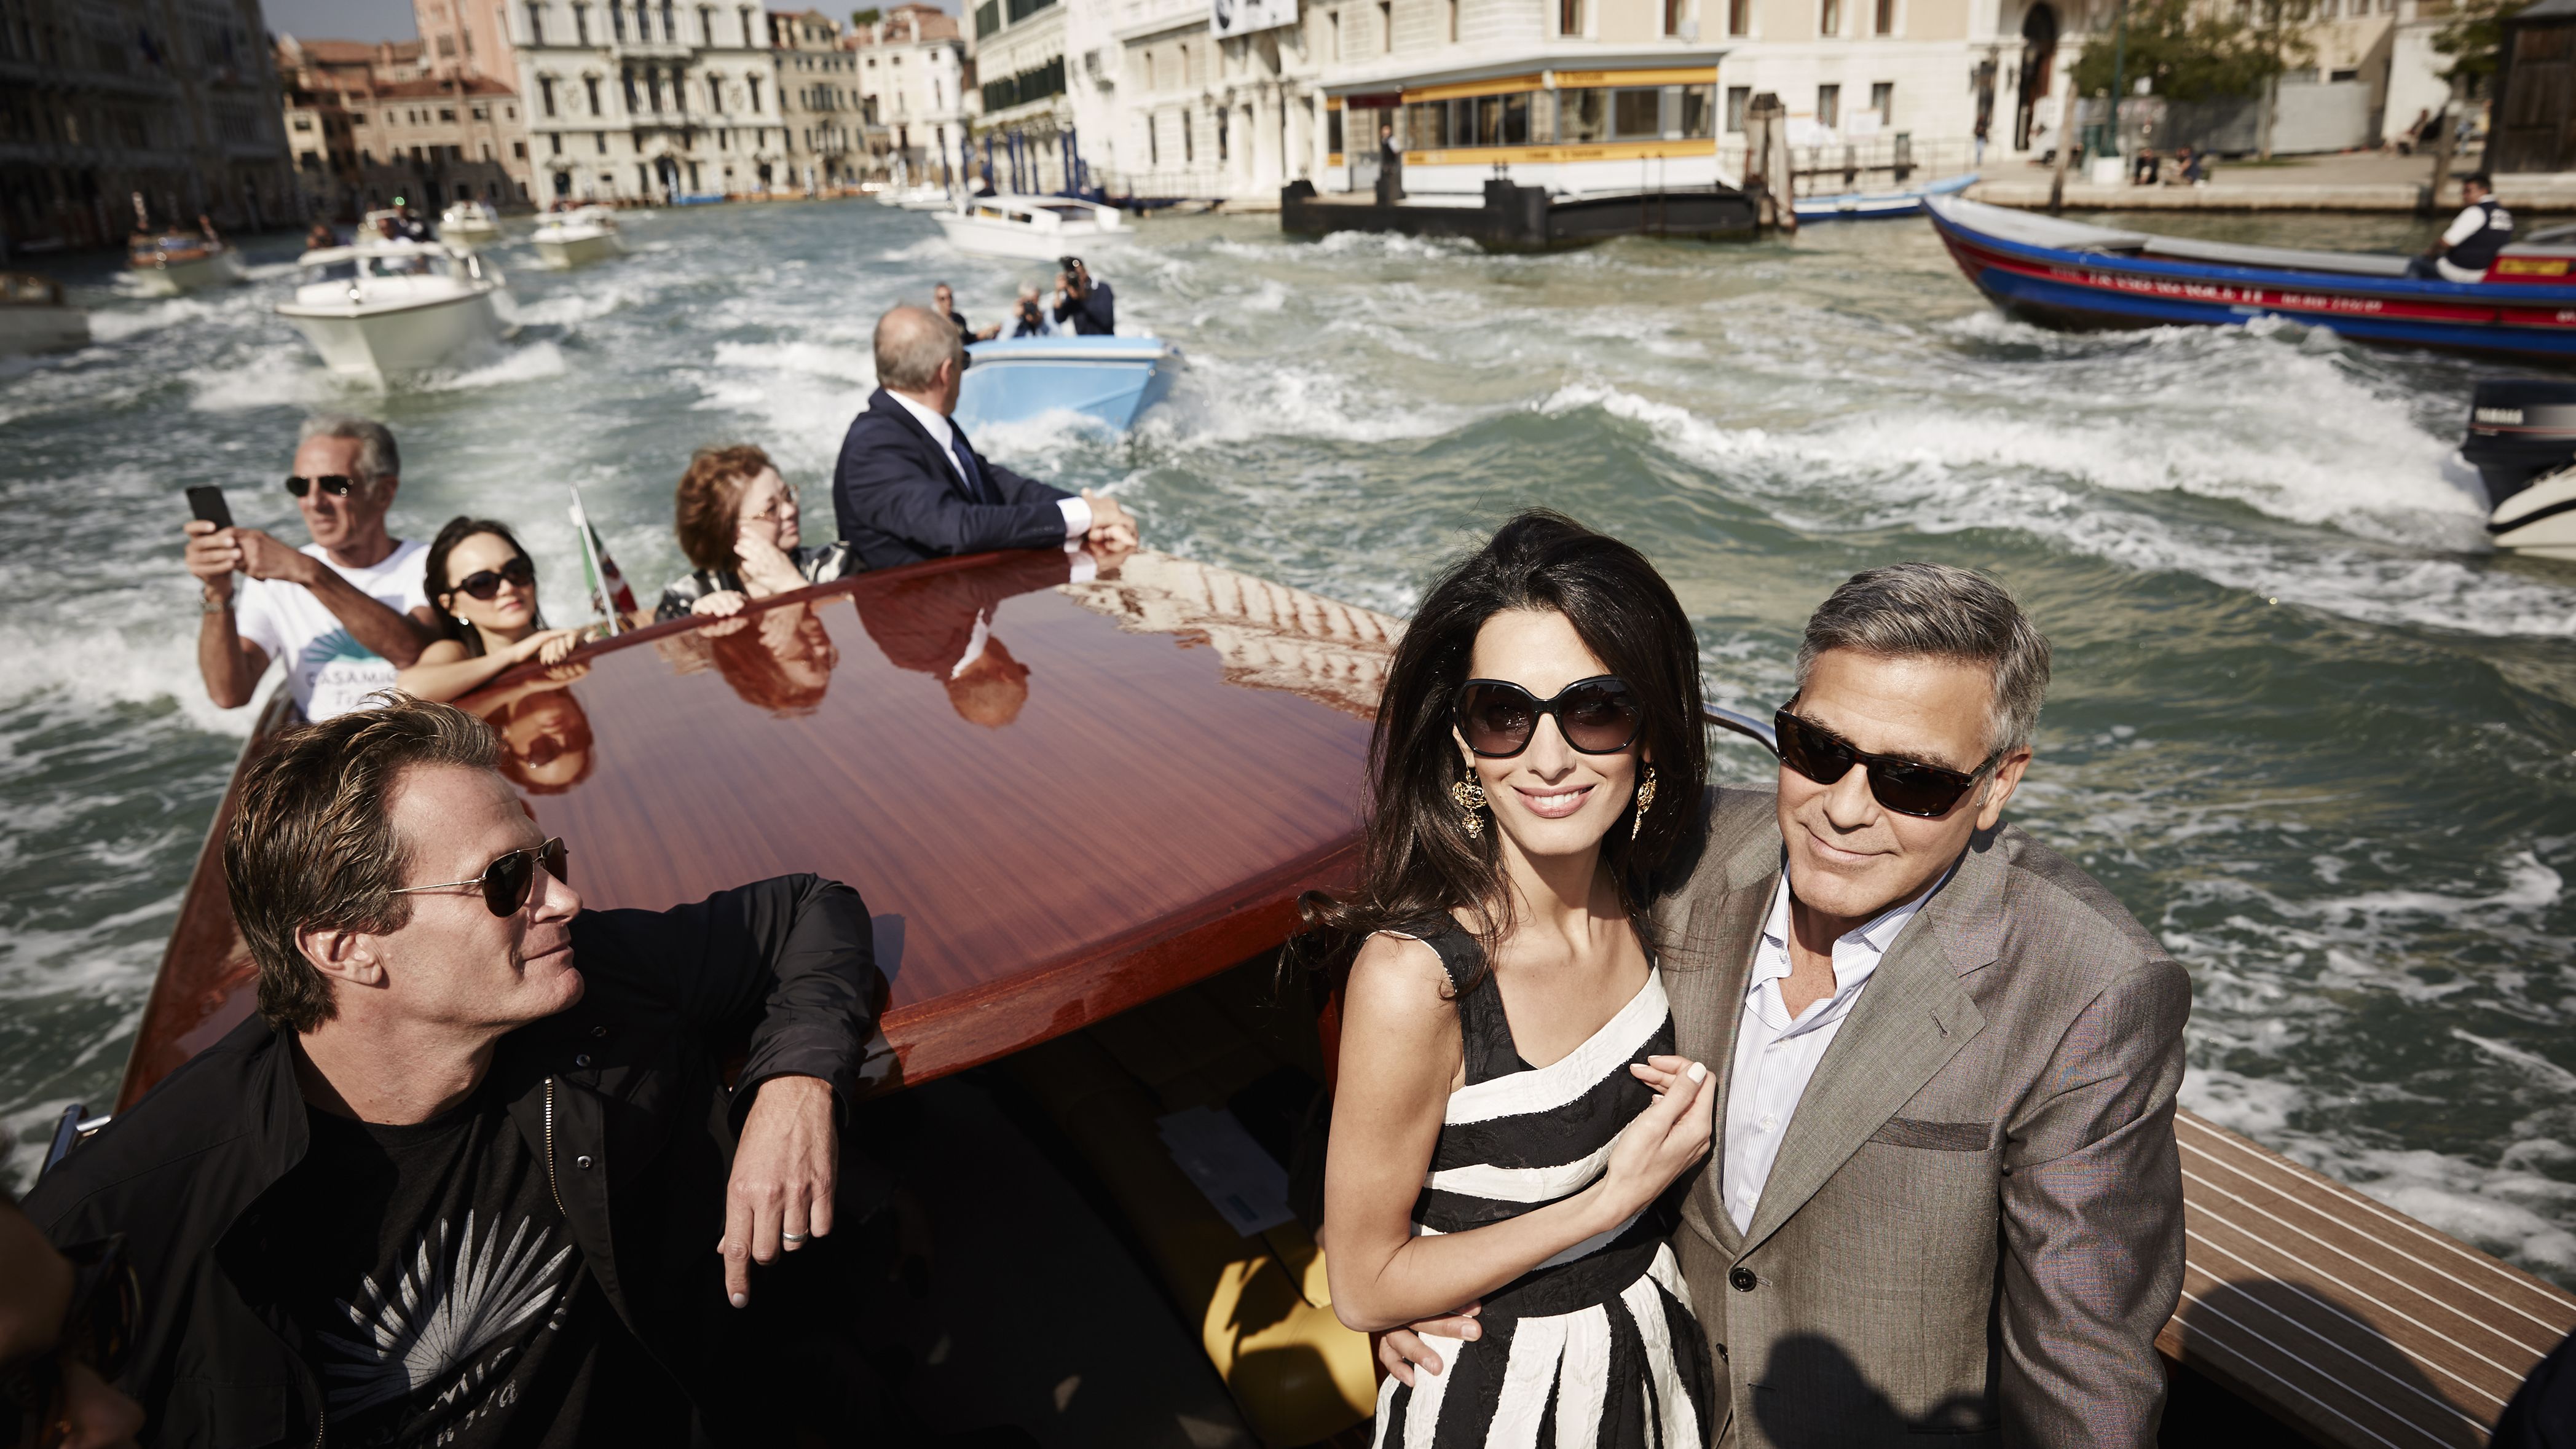 Actor George Clooney, right, and his fiancee, lawyer Amal Alamuddin, arrive in Venice, Italy, in September 2014. <a href="http://www.cnn.com/2014/09/27/showbiz/gallery/clooney-wedding/index.html" target="_blank">The two were married</a> in a private ceremony attended by some of their celebrity friends.